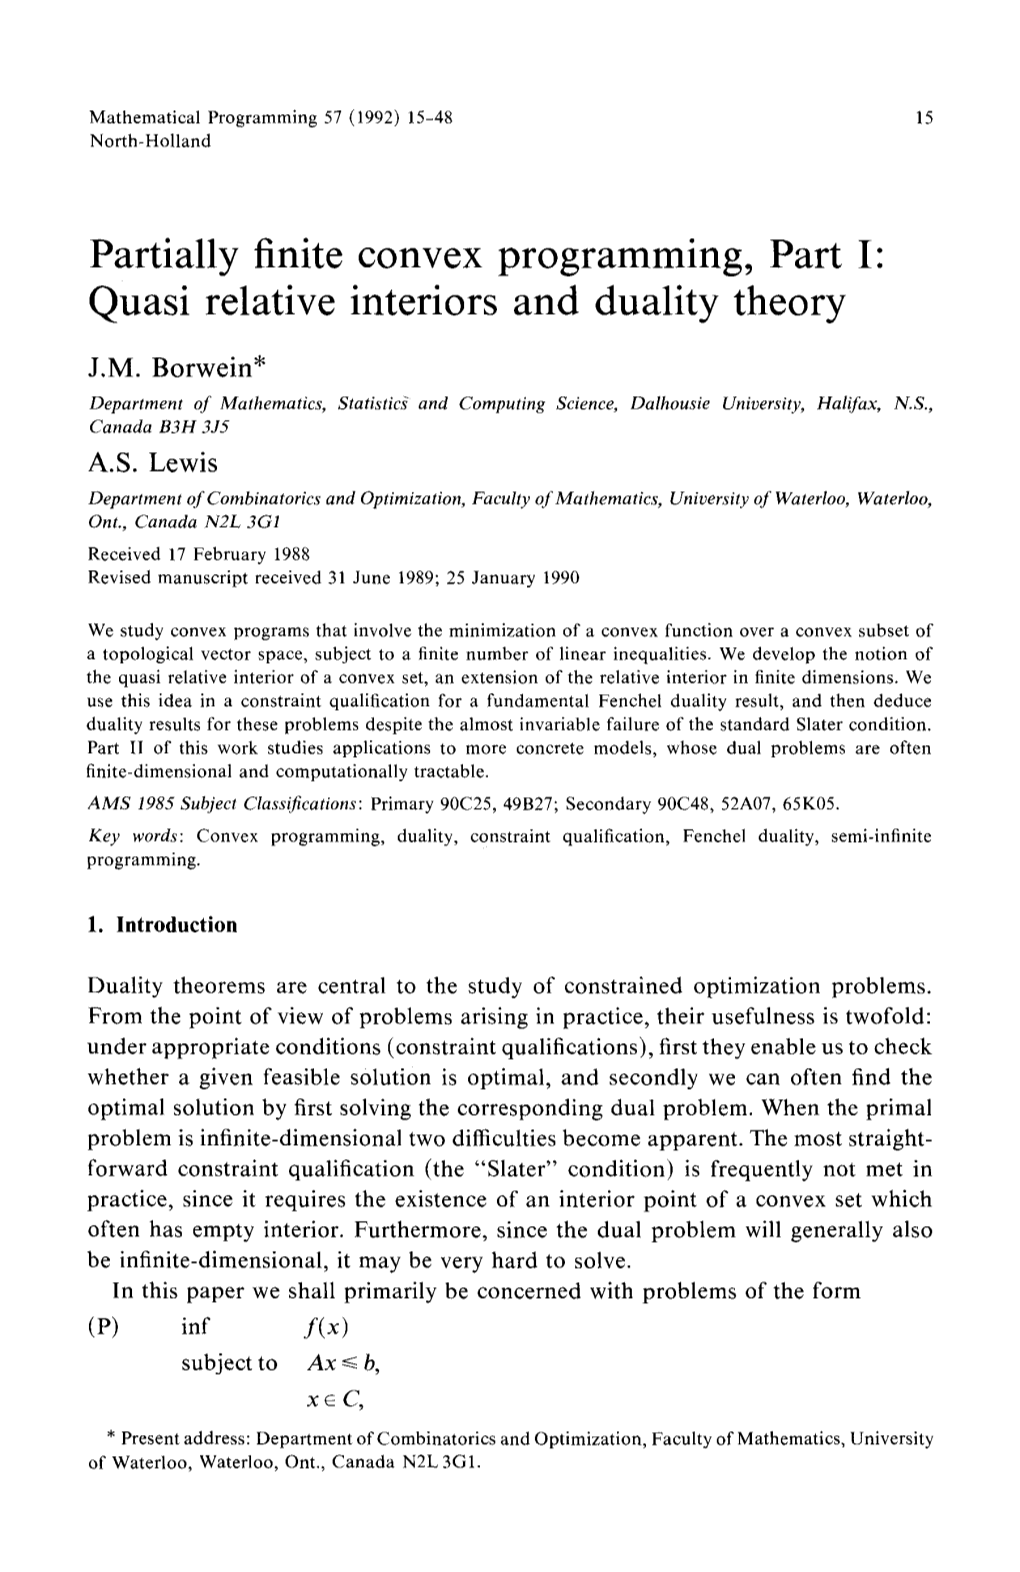 Partially Finite Convex Programming, Part I: Quasi Relative Interiors and Duality Theory